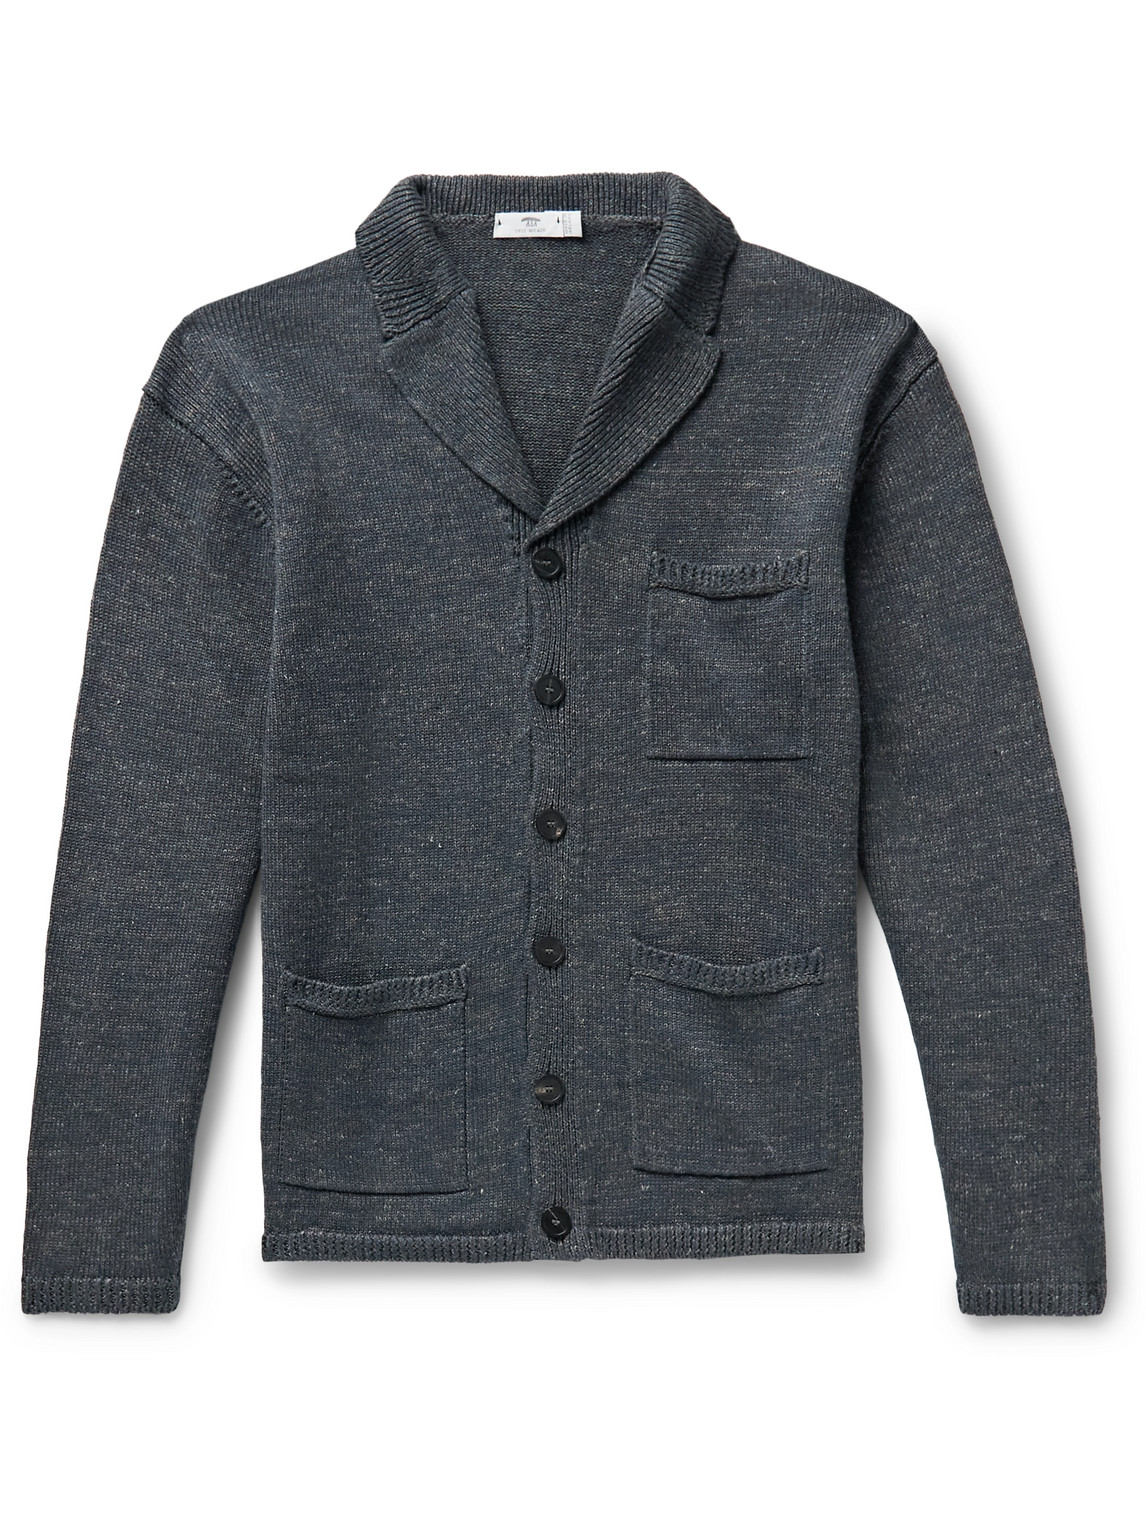 Inis Meain Pub Jacket Linen Cardigan In Blue | ModeSens